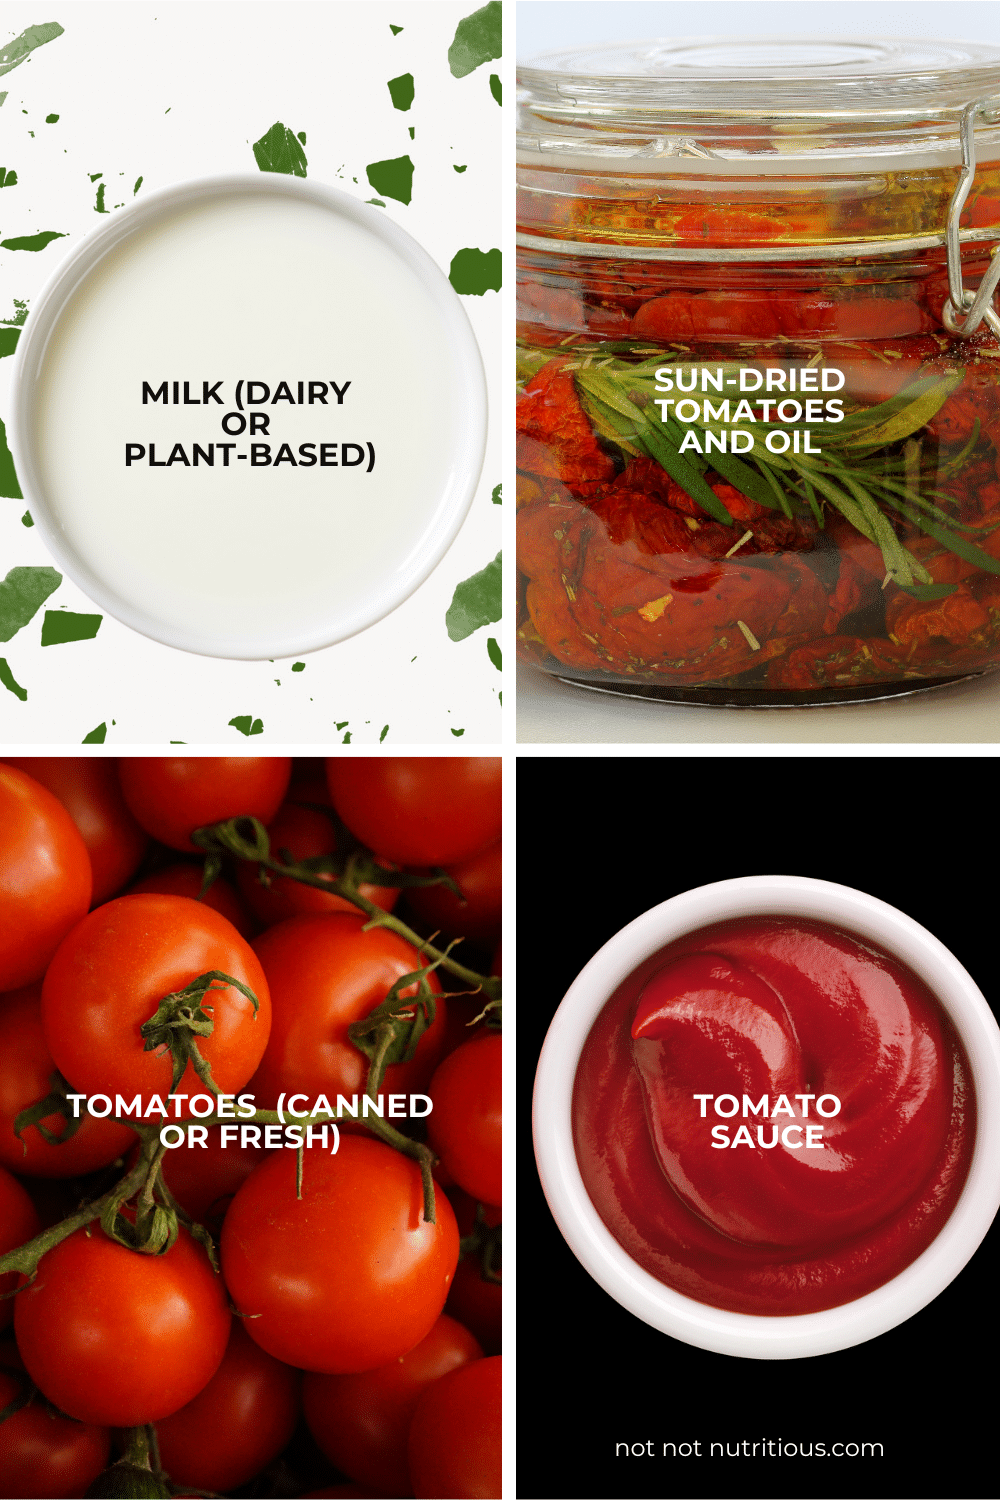 Ingredients for Sun-dried tomato cream sauce: milk (dairy or plant), sun-dried tomatoes and oil, fresh or canned tomatoes, tomato sauce